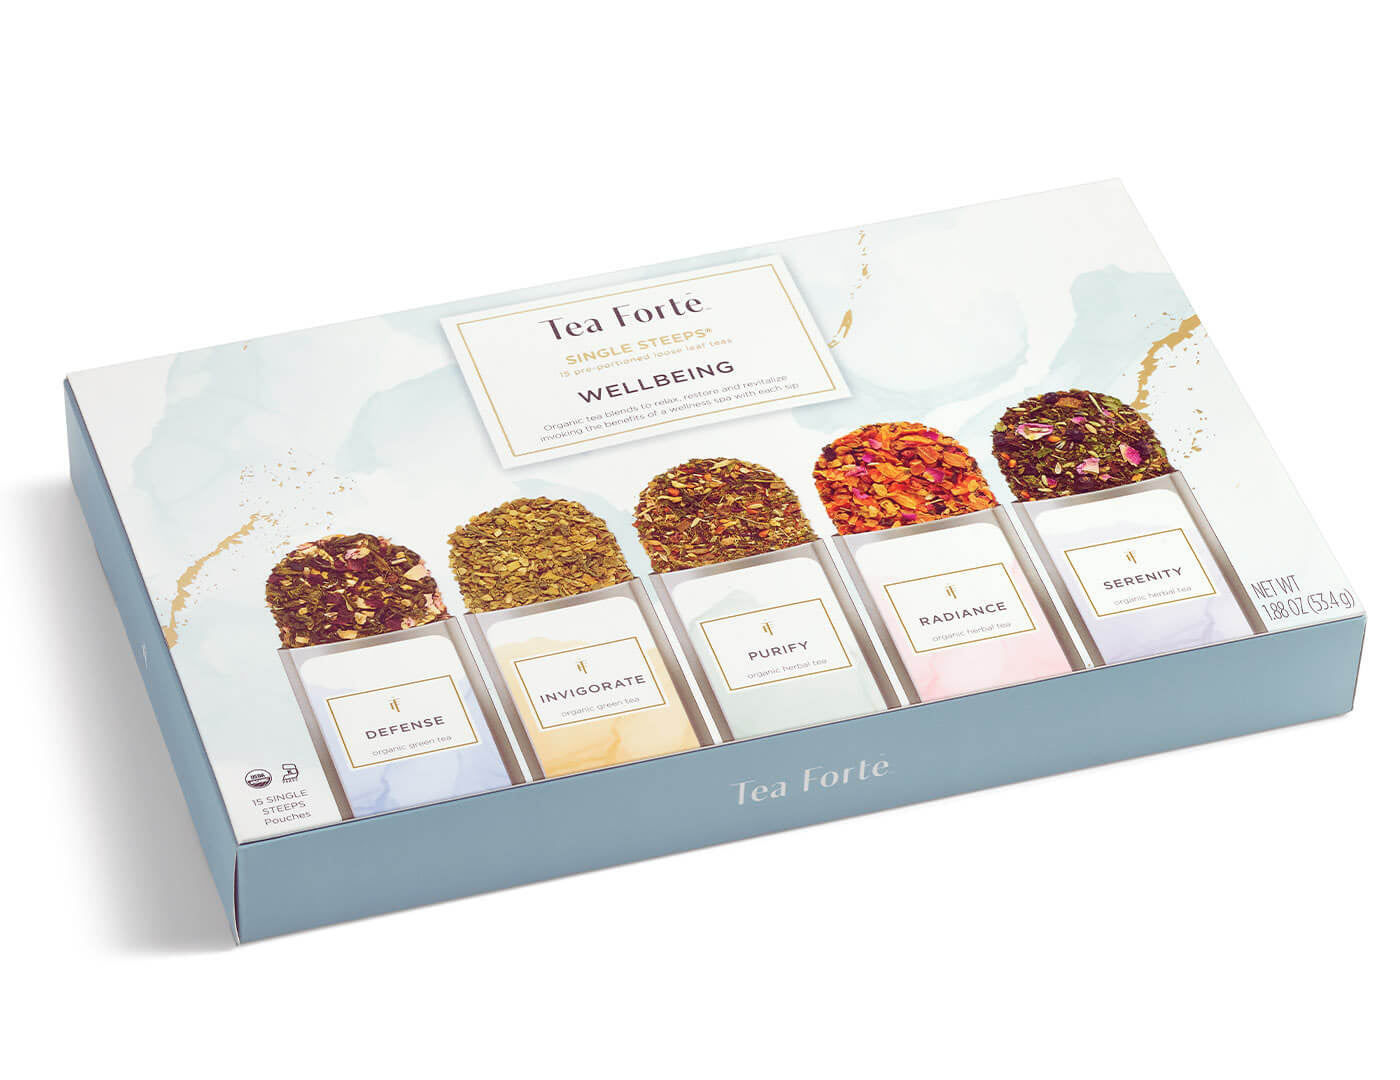 Wellbeing tea assortment 15 count box of Single Steeps pouches with lid closed